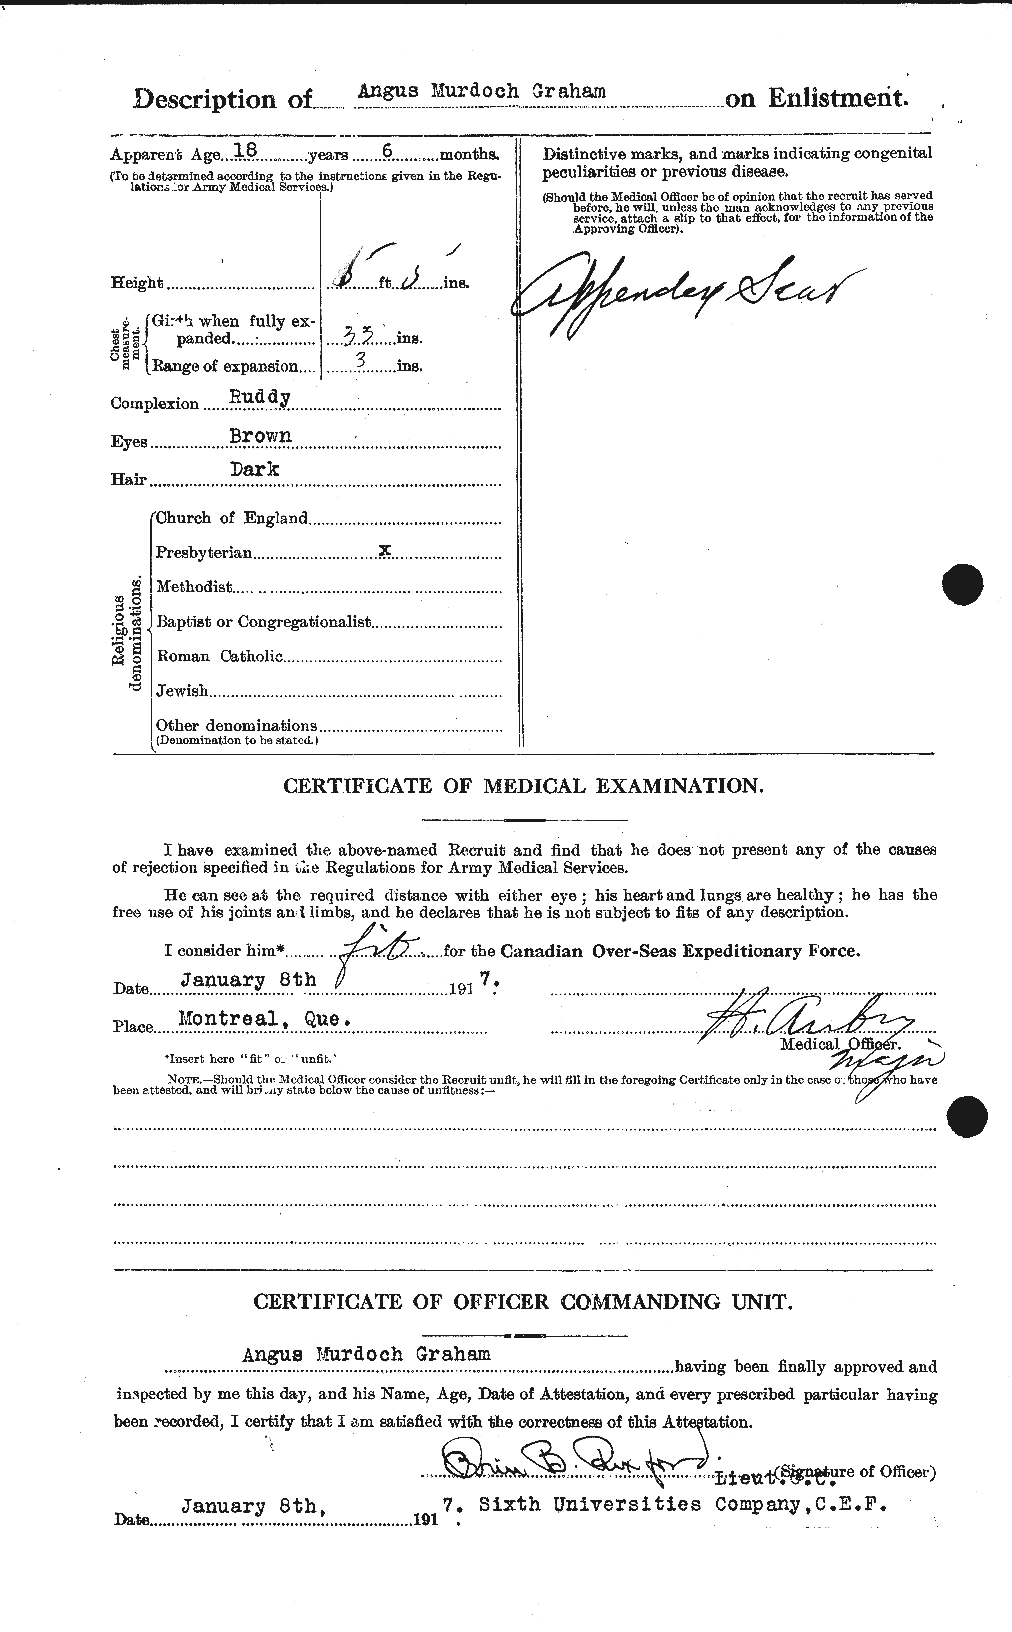 Personnel Records of the First World War - CEF 359627b